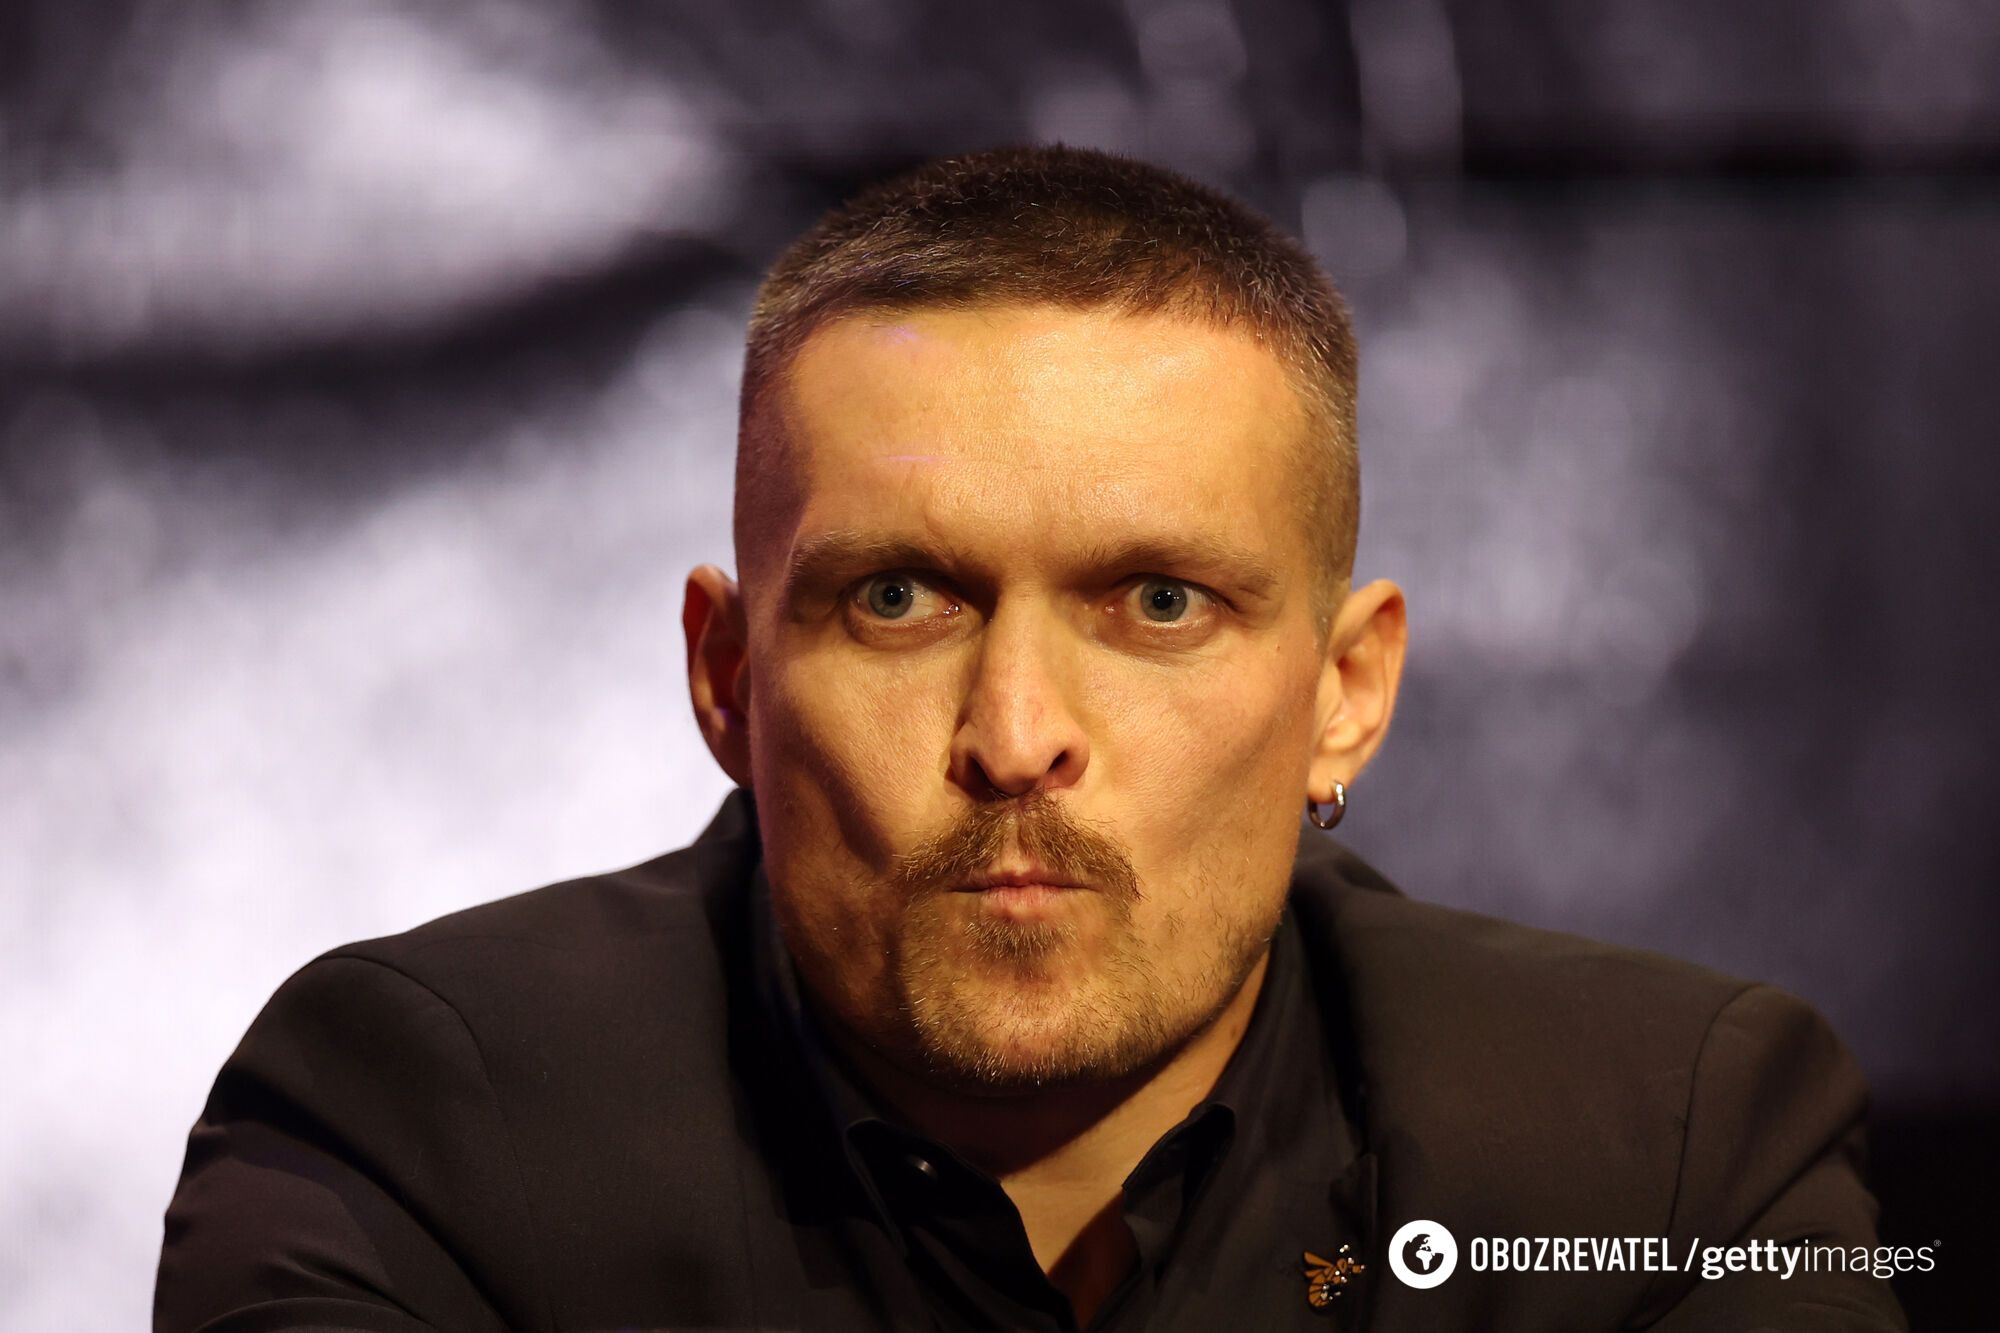 ''For the whole of Ukraine. You will be disqualified.'' Klychko speaks out on Usyk-Fury fight